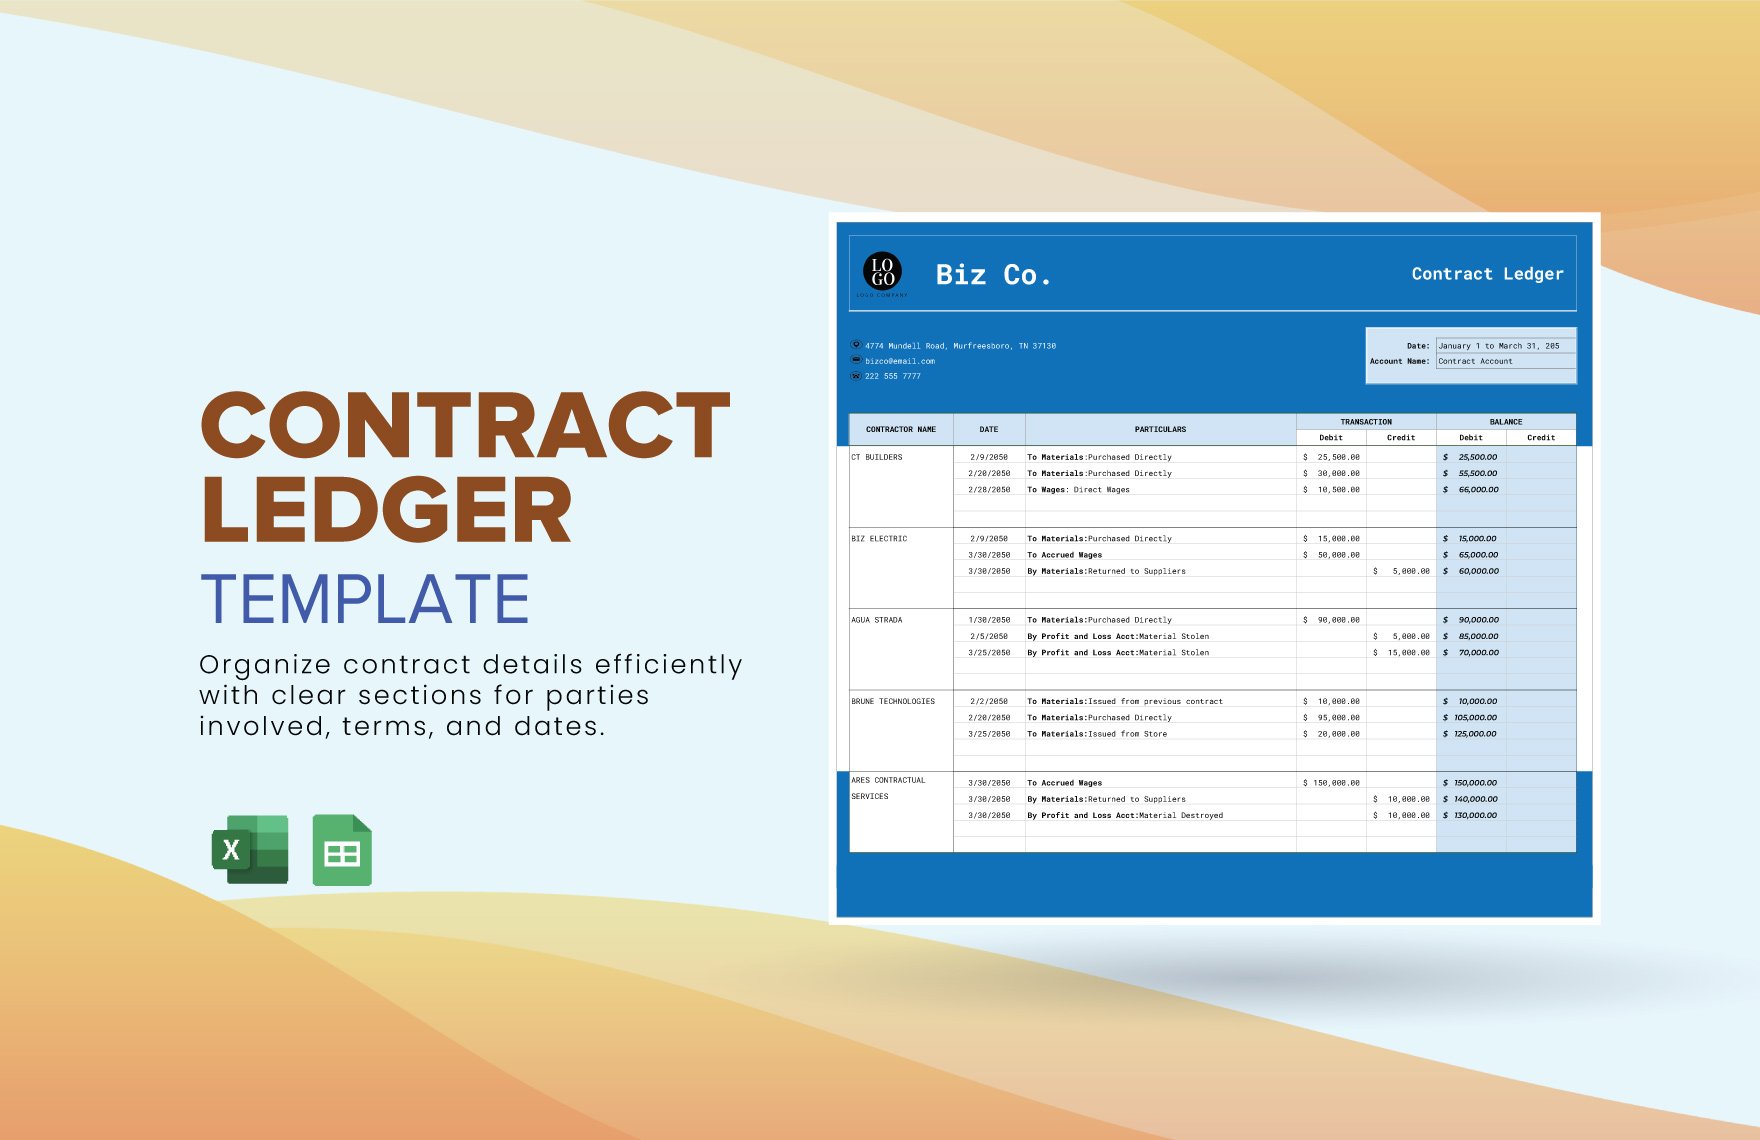 Contract Ledger Template in Excel, Google Sheets